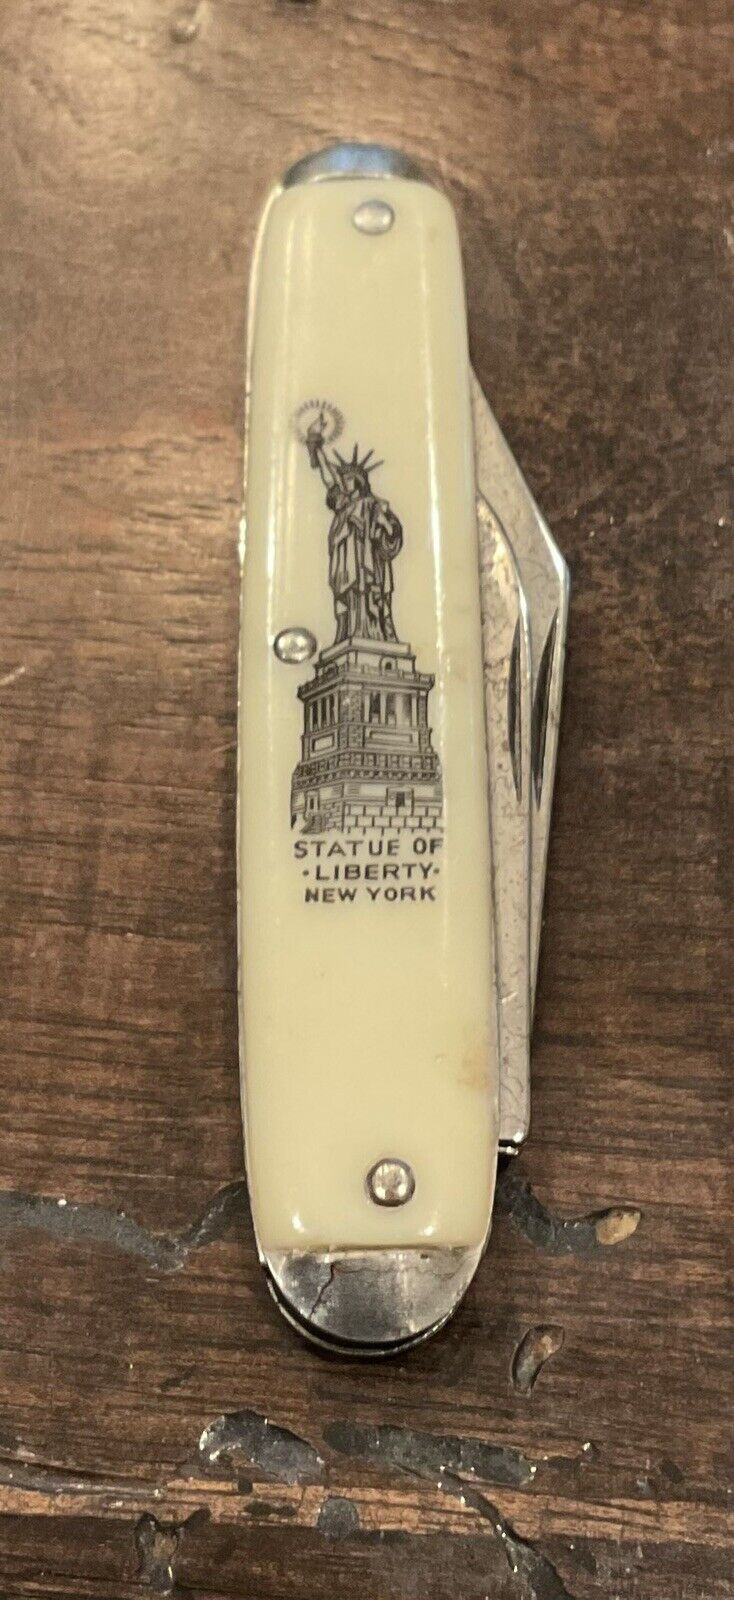 Statue Of Liberty Vintage Pocket Knife Made In USA.